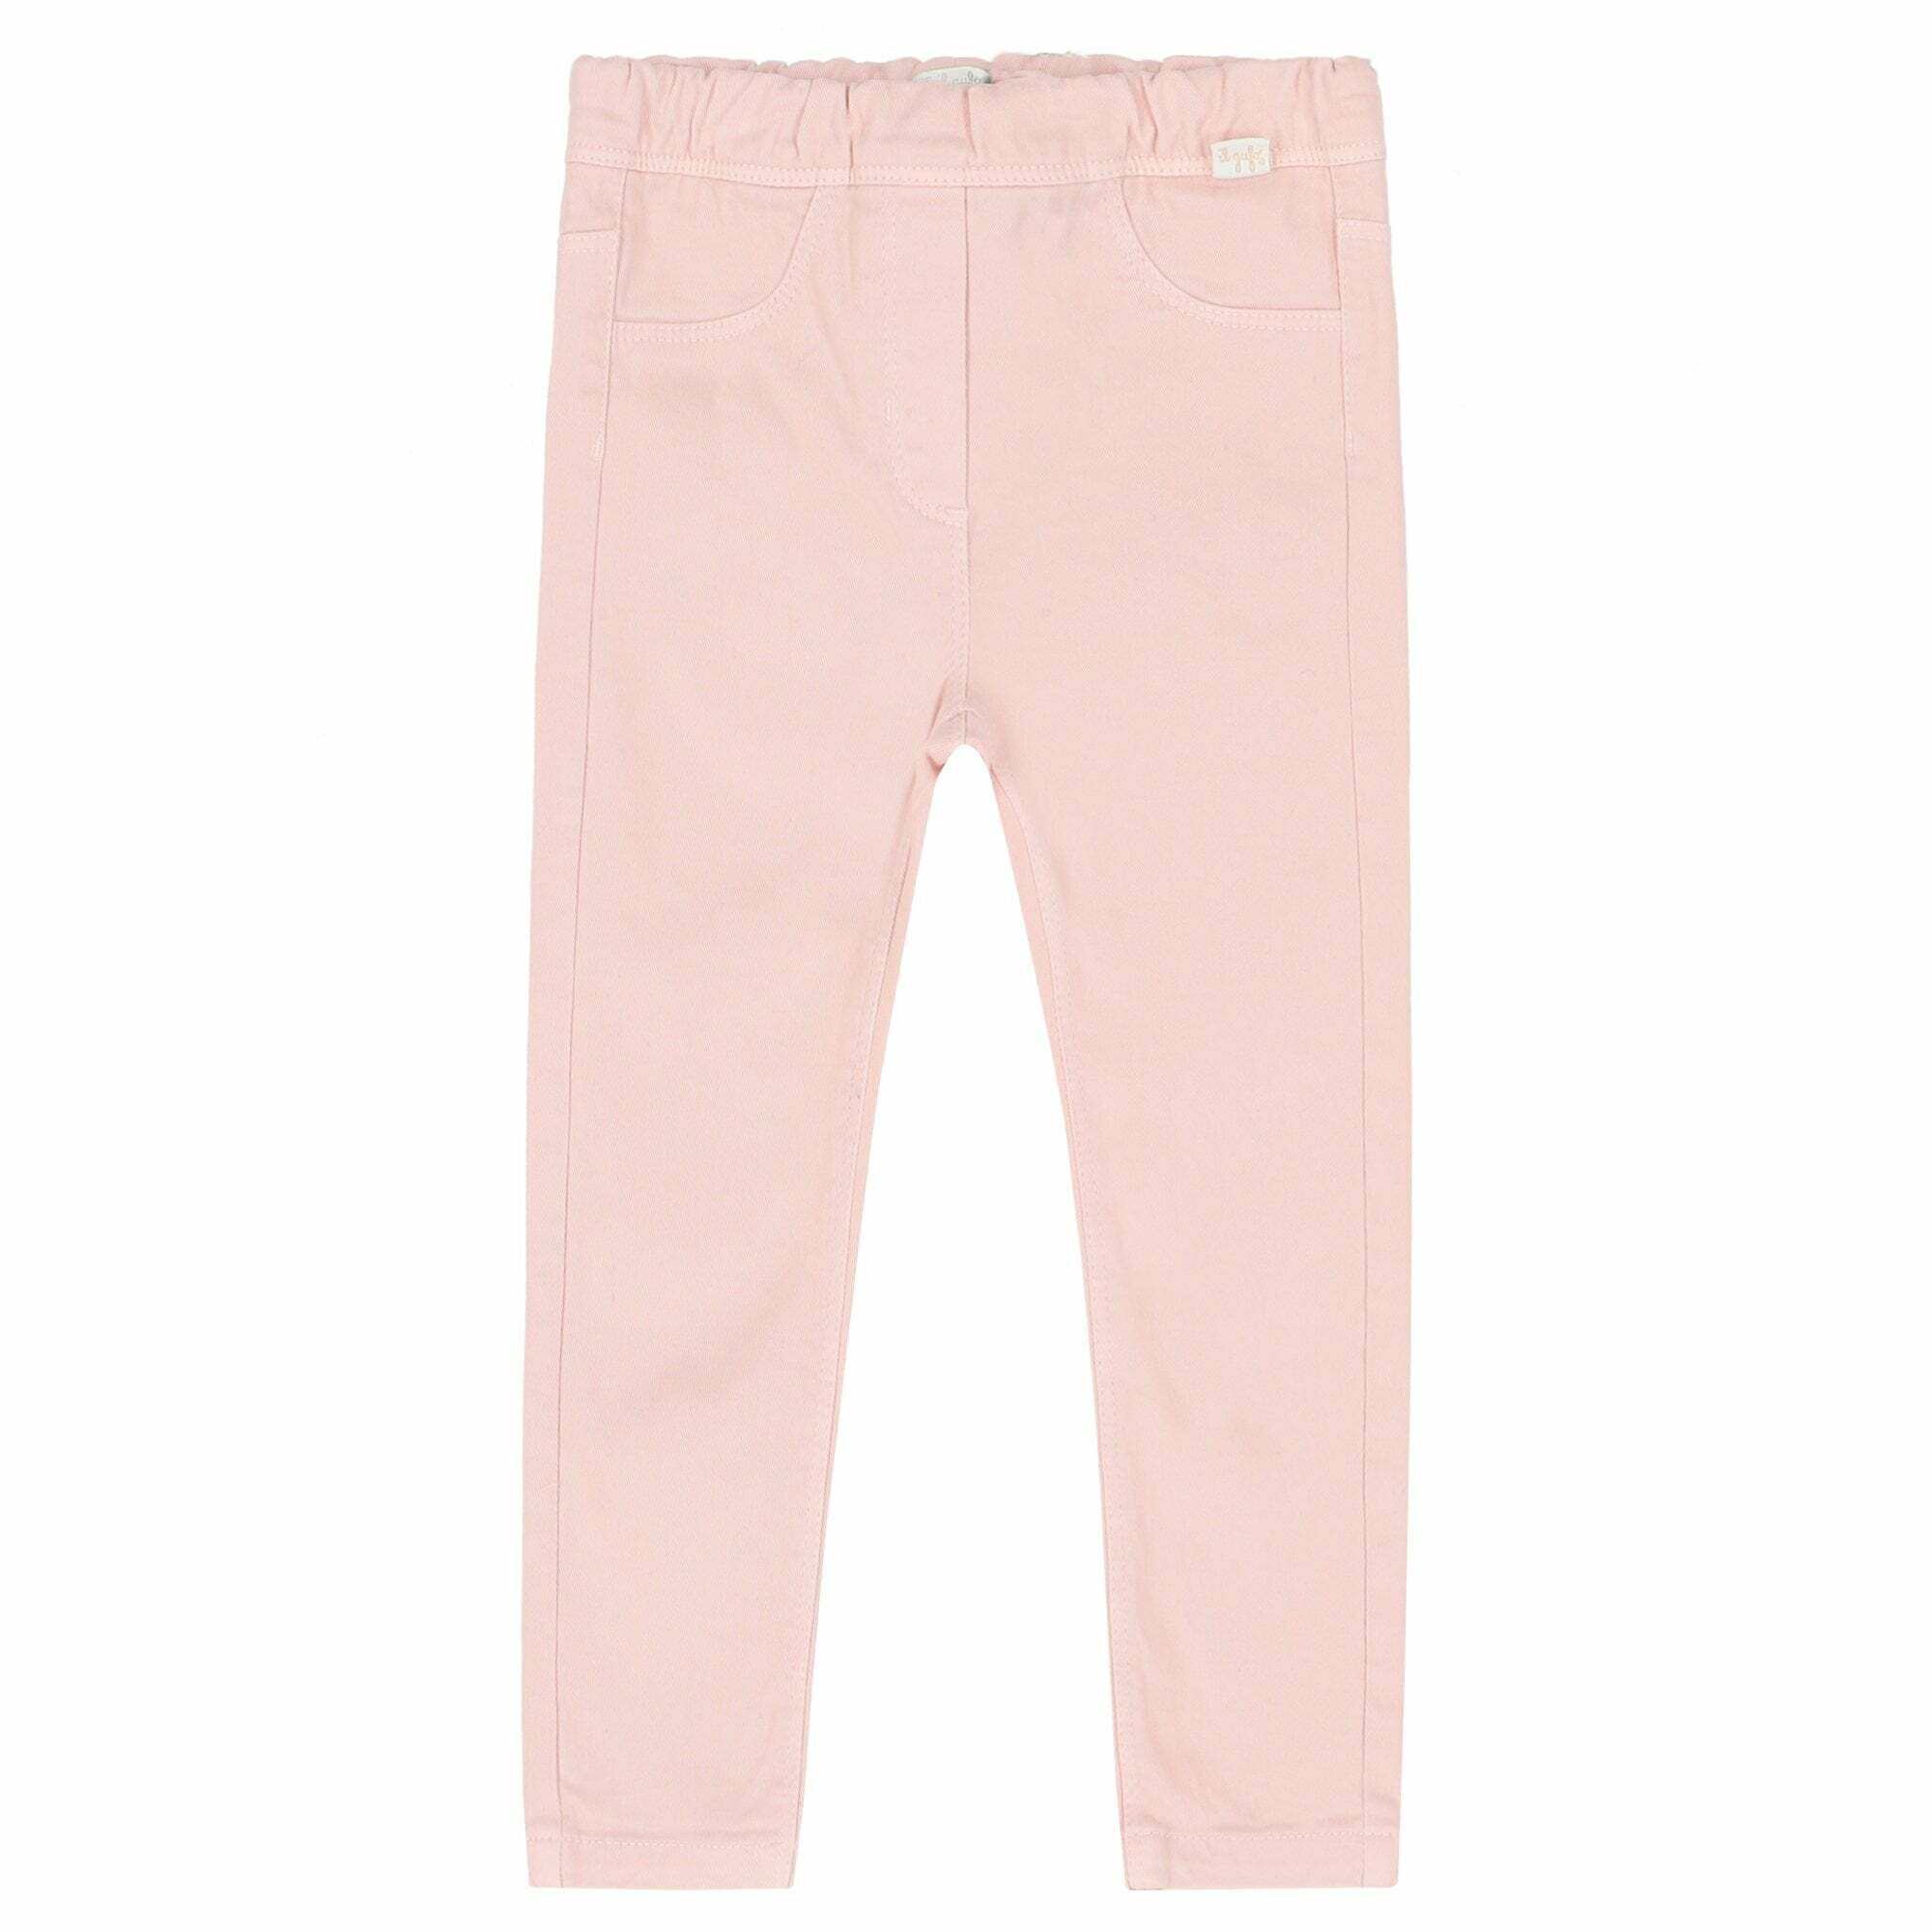 Ladies Polly Coral Pink Trousers 55 polyester 45 cotton